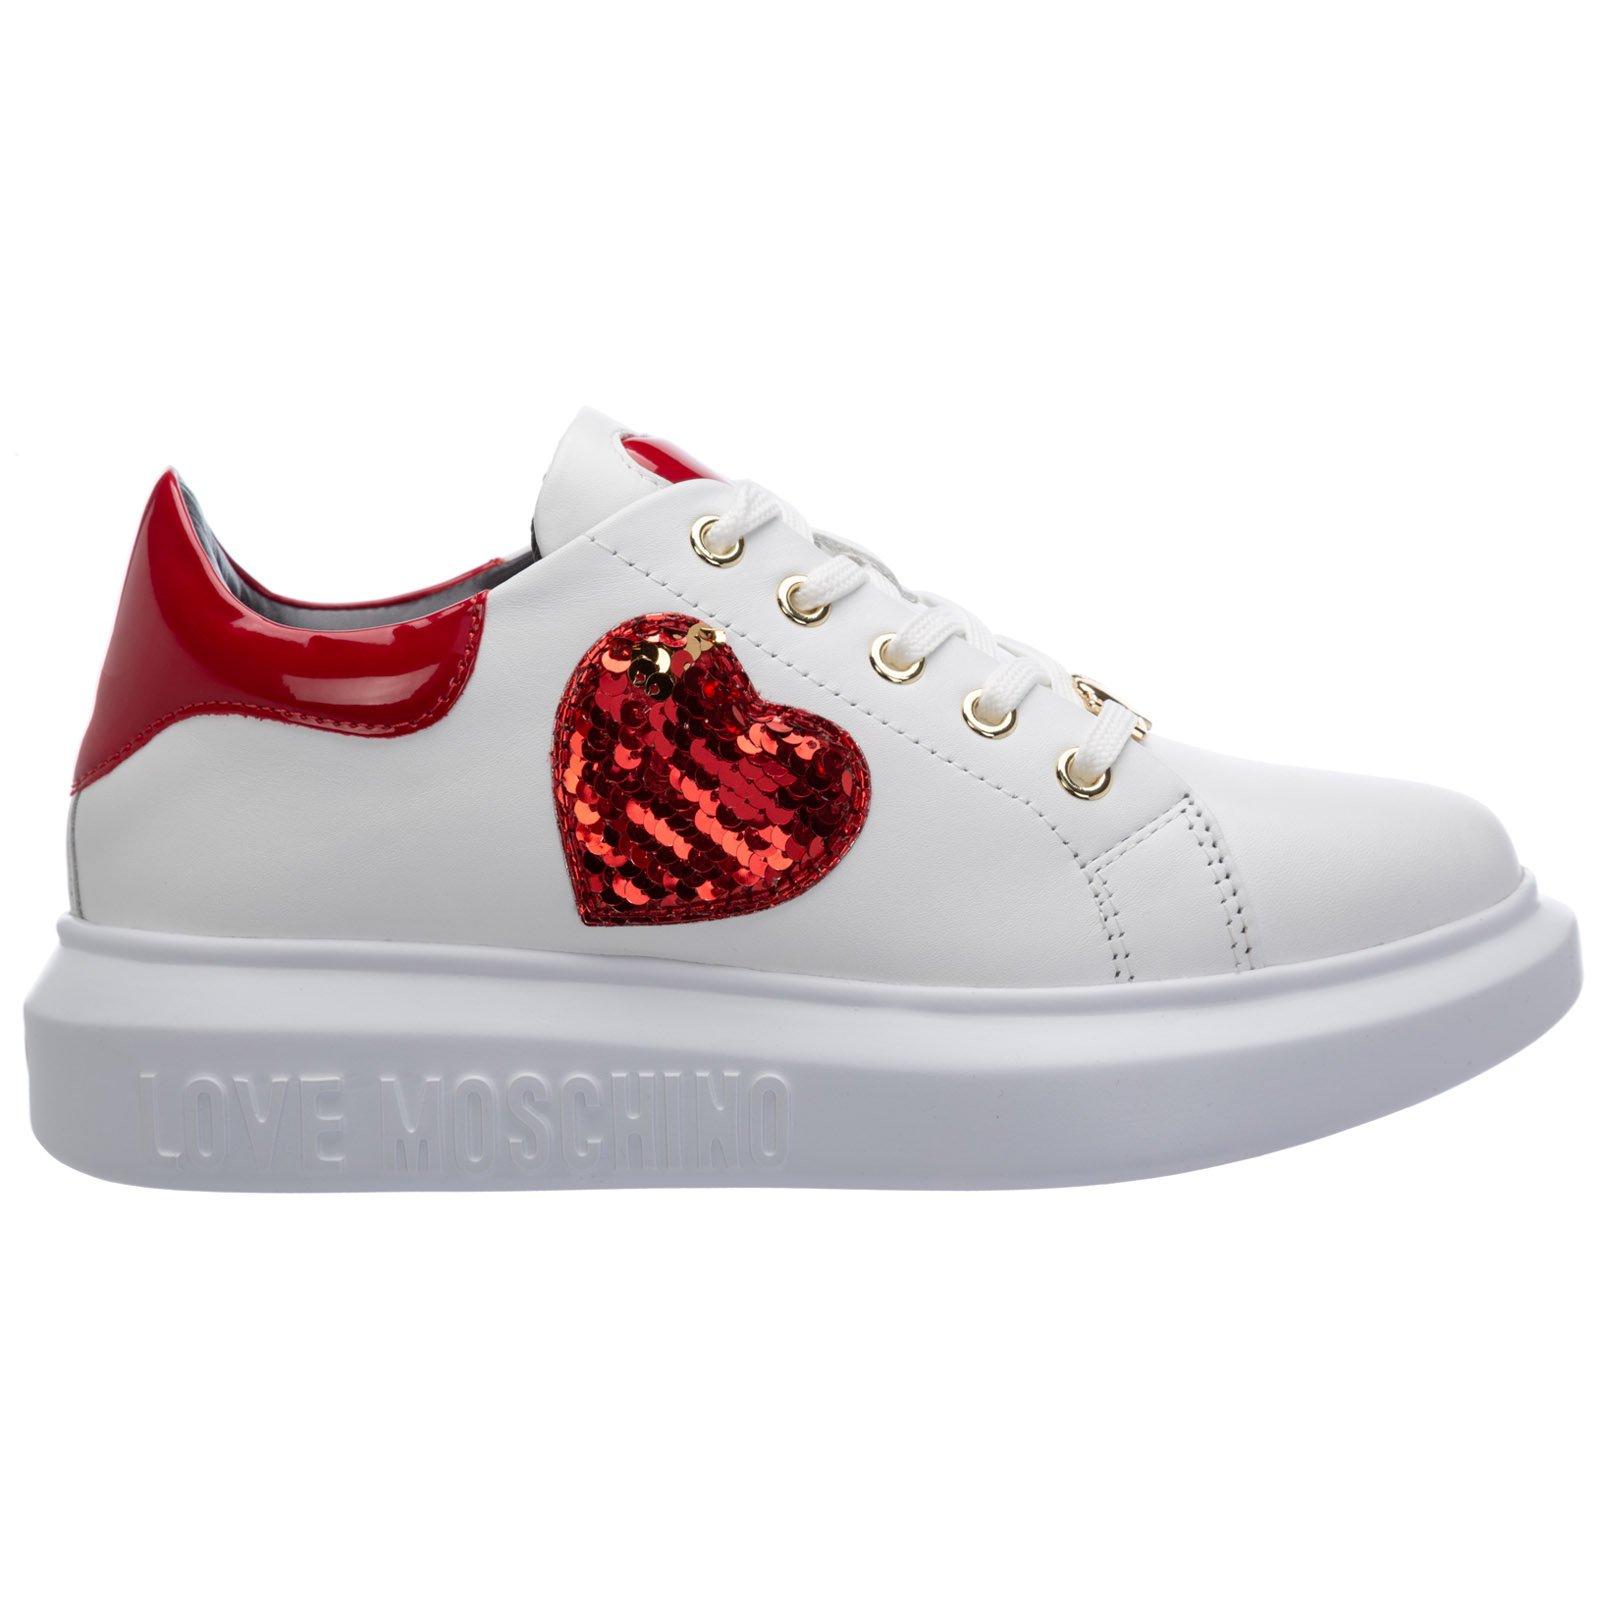 Love Moschino Leather Sequin Heart Detailed Sneakers in White - Lyst